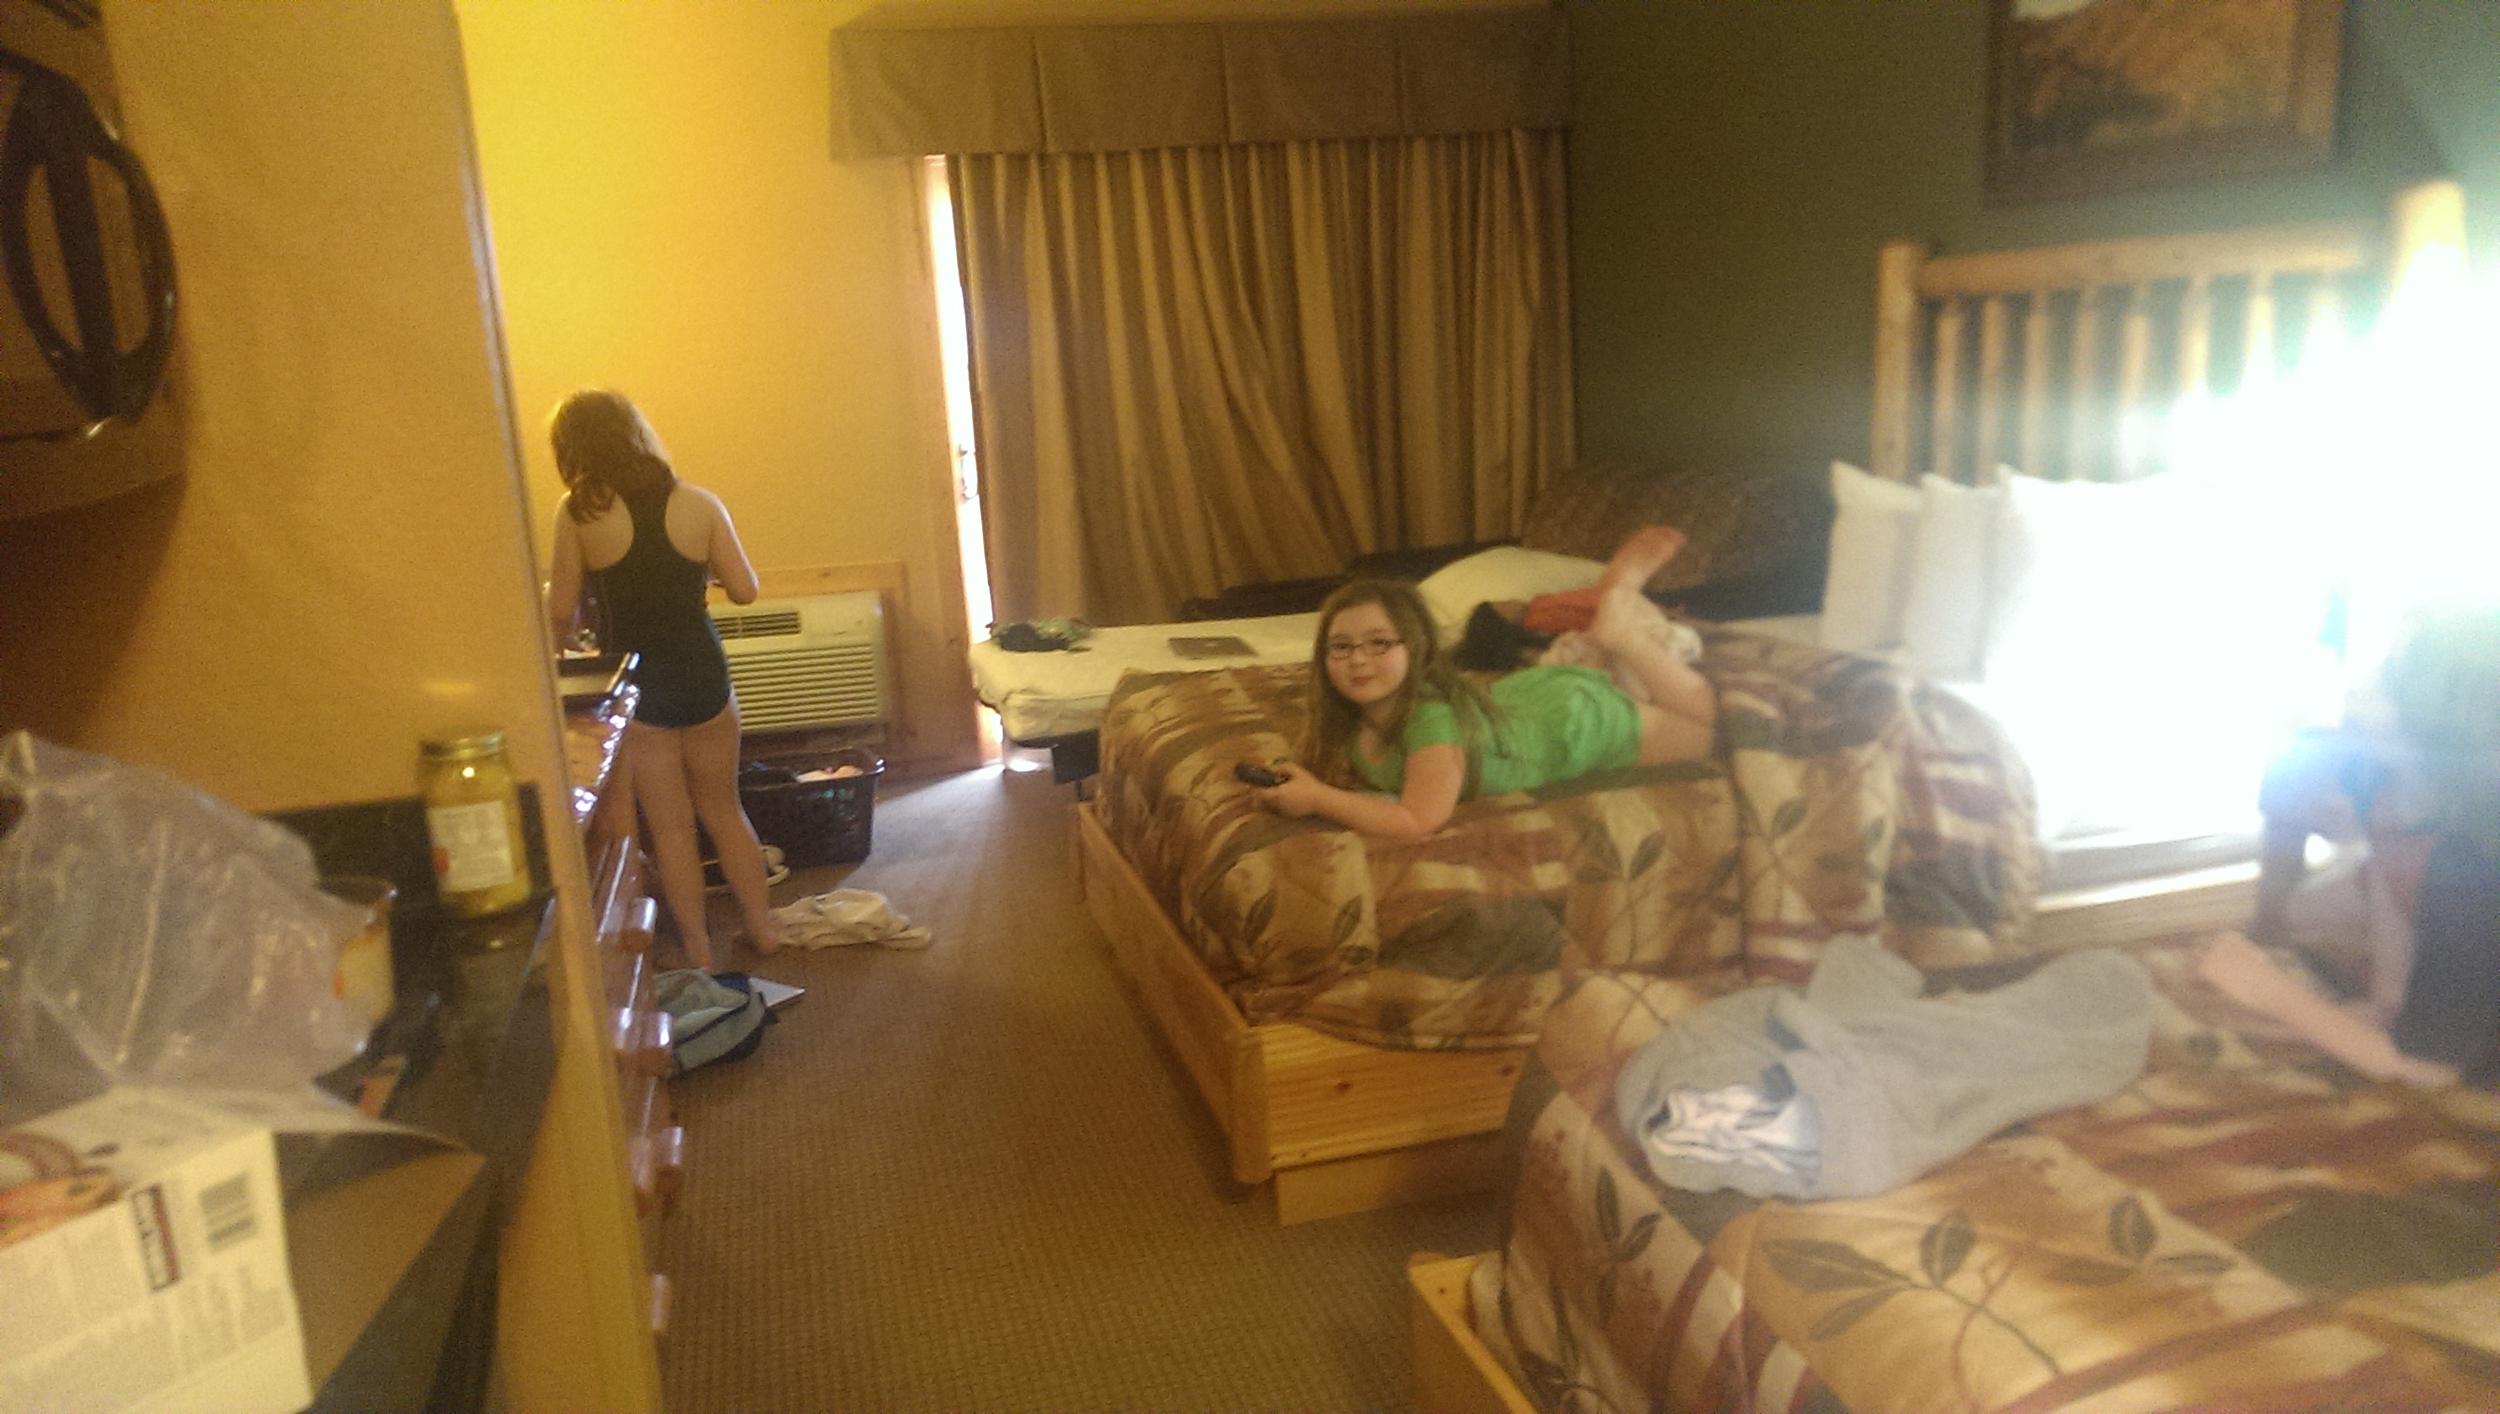 Our spacious room